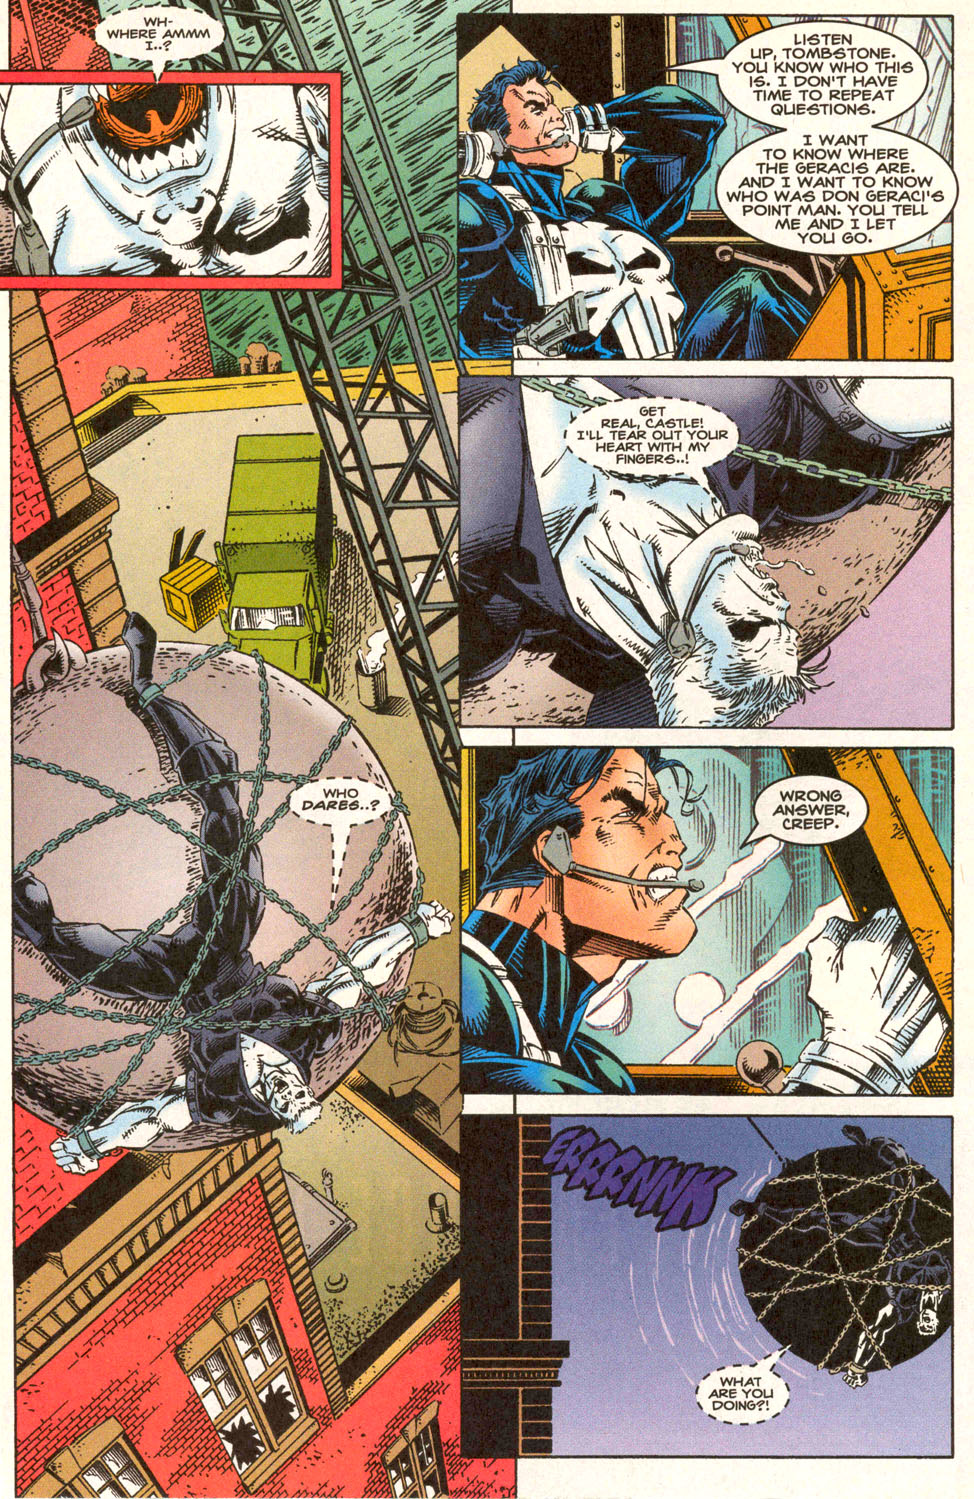 Punisher (1995) issue 10 - Last Shot Fired - Page 6